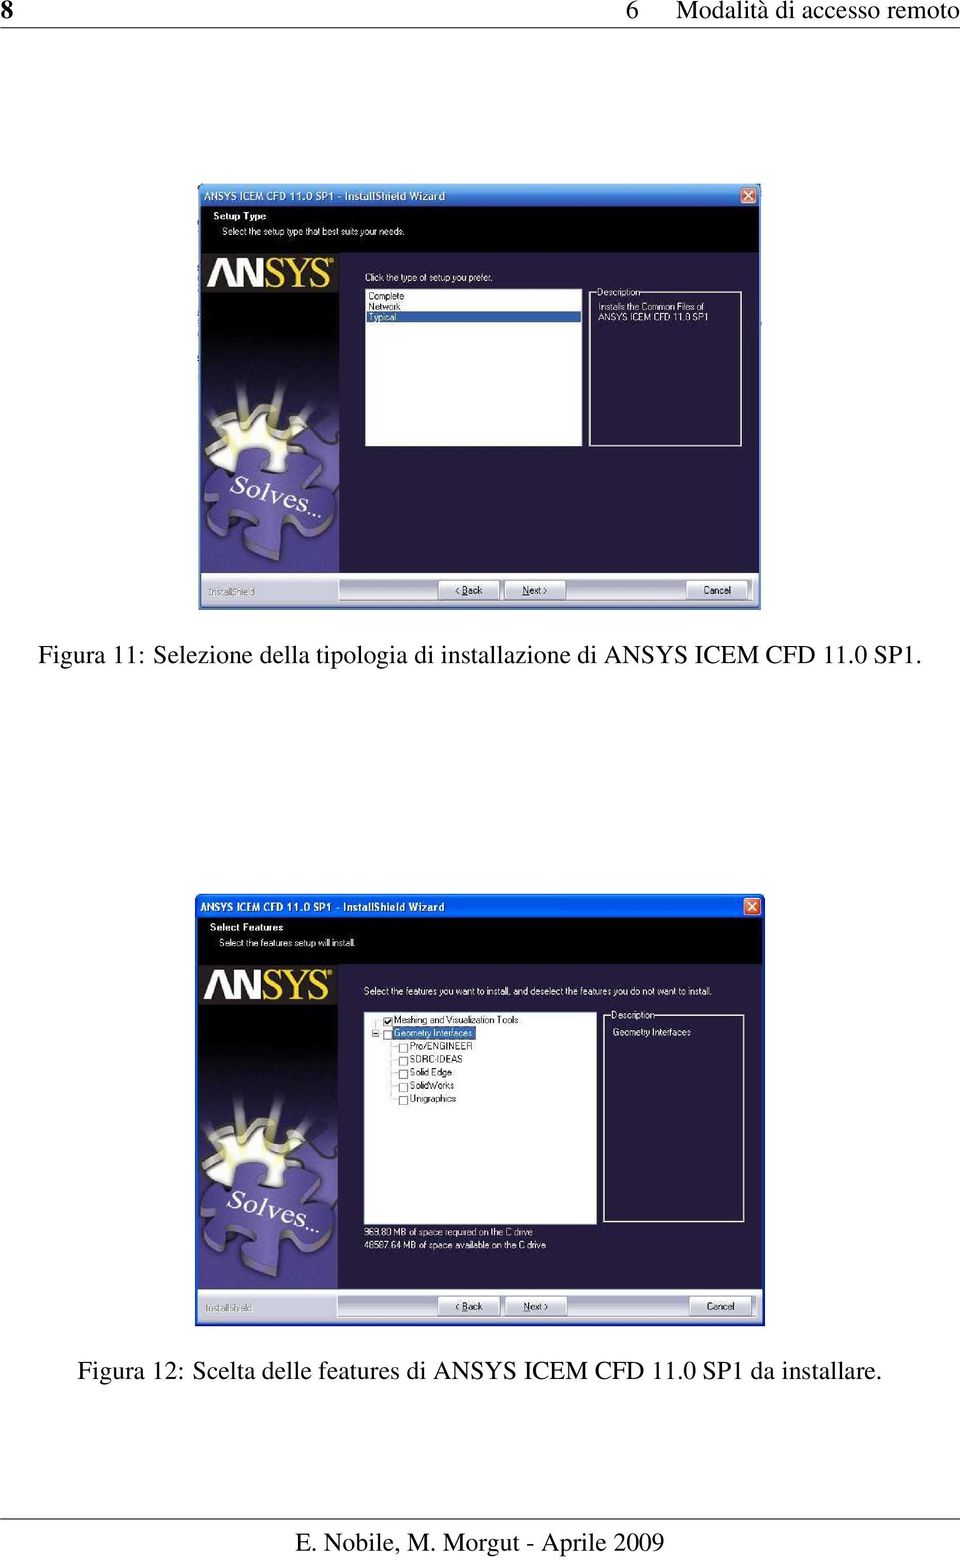 ANSYS ICEM CFD 11.0 SP1.